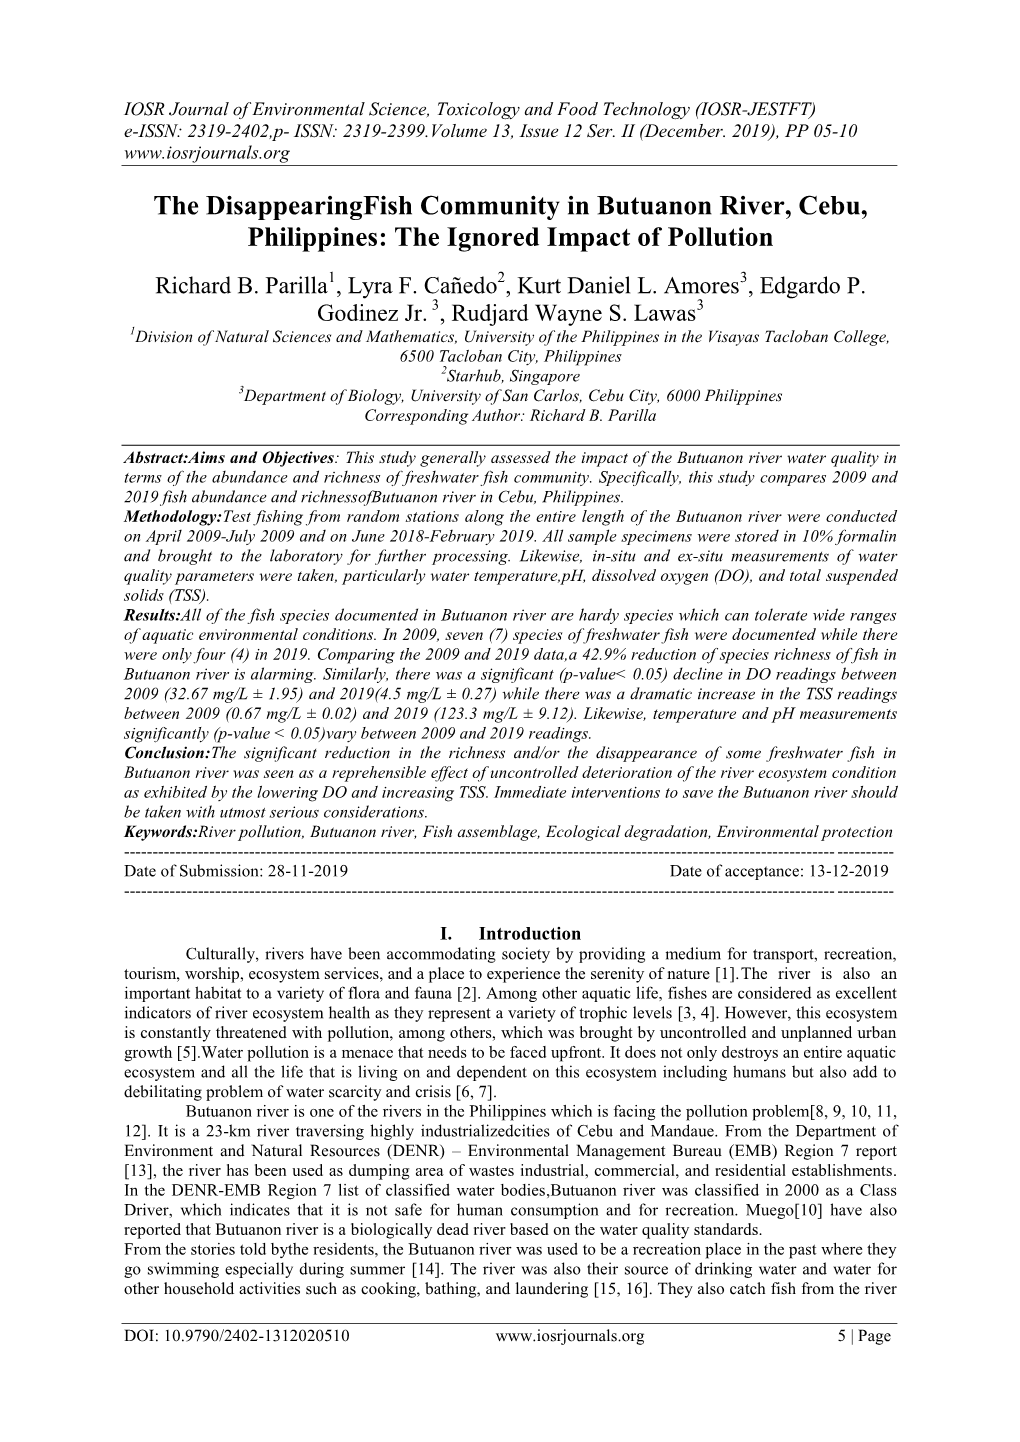 The Disappearingfish Community in Butuanon River, Cebu, Philippines: the Ignored Impact of Pollution